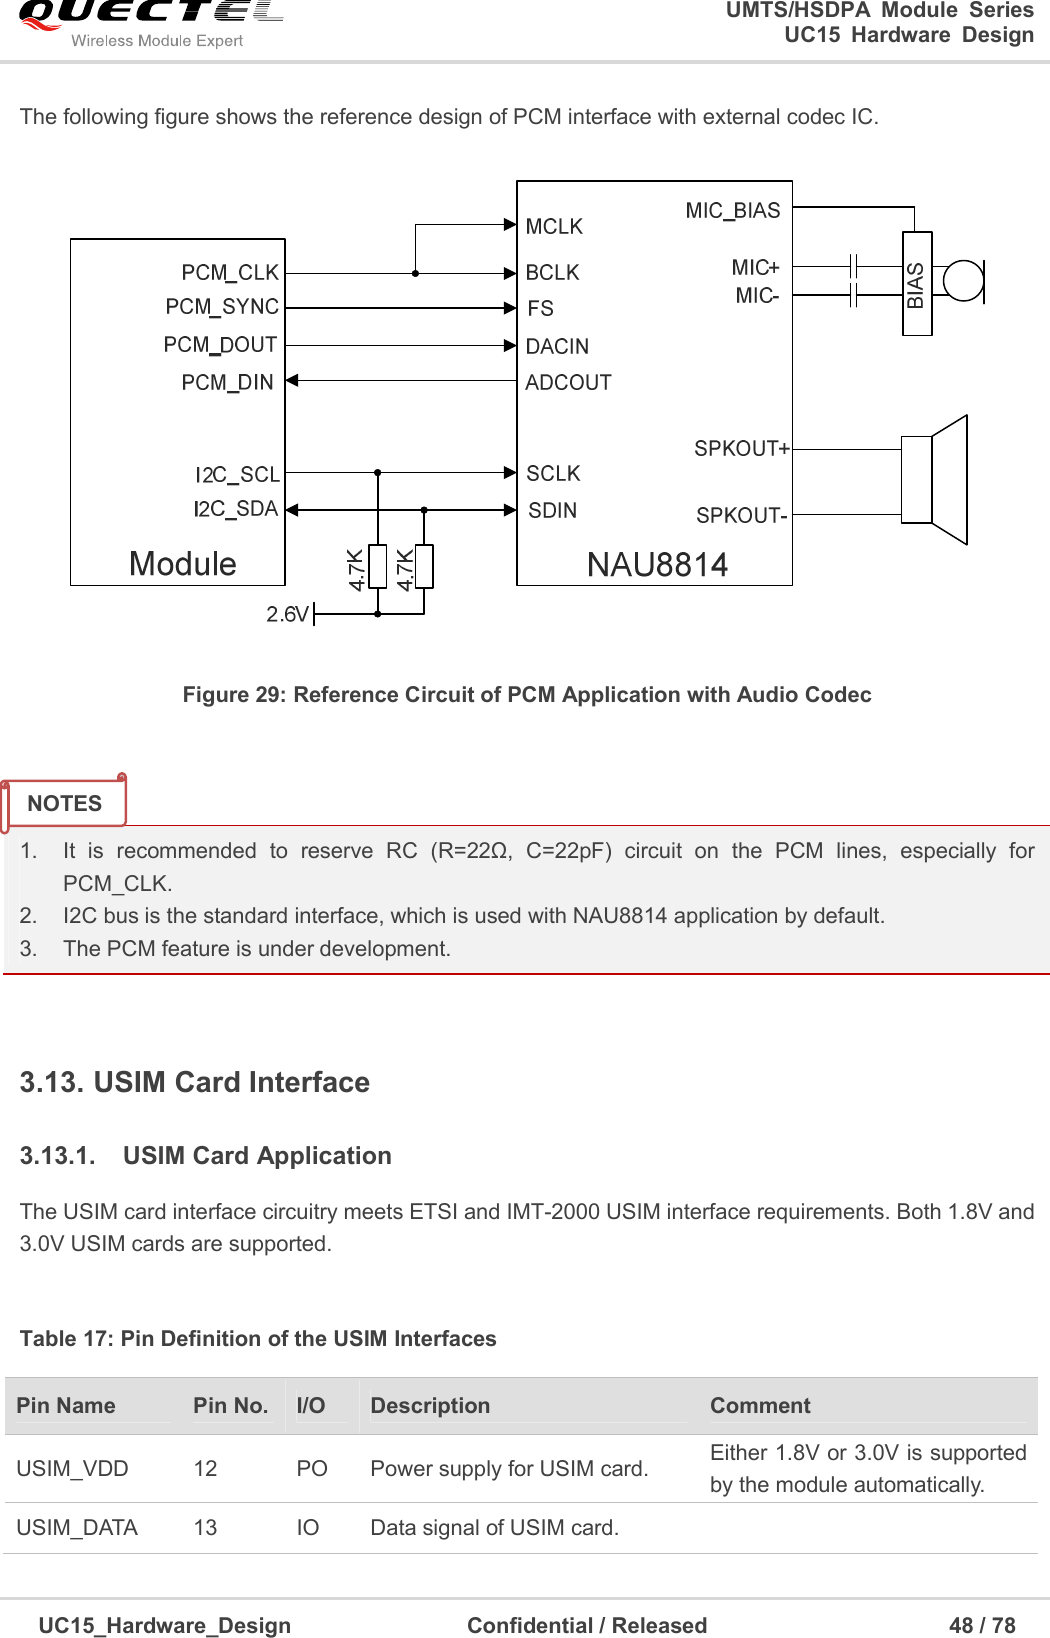                                                                        UMTS/HSDPA  Module  Series                                                                 UC15 Hardware Design  UC15_Hardware_Design                                Confidential / Released                                            48 / 78    The following figure shows the reference design of PCM interface with external codec IC.  Figure 29: Reference Circuit of PCM Application with Audio Codec   1.  It  is  recommended  to  reserve  RC  (R=22Ω,  C=22pF)  circuit  on  the  PCM  lines,  especially  for PCM_CLK. 2.  I2C bus is the standard interface, which is used with NAU8814 application by default. 3.  The PCM feature is under development.  3.13. USIM Card Interface 3.13.1.  USIM Card Application The USIM card interface circuitry meets ETSI and IMT-2000 USIM interface requirements. Both 1.8V and 3.0V USIM cards are supported.  Table 17: Pin Definition of the USIM Interfaces Pin Name    Pin No. I/O  Description  Comment USIM_VDD  12  PO  Power supply for USIM card.  Either 1.8V or 3.0V is supported by the module automatically. USIM_DATA  13  IO  Data signal of USIM card.   NOTES 